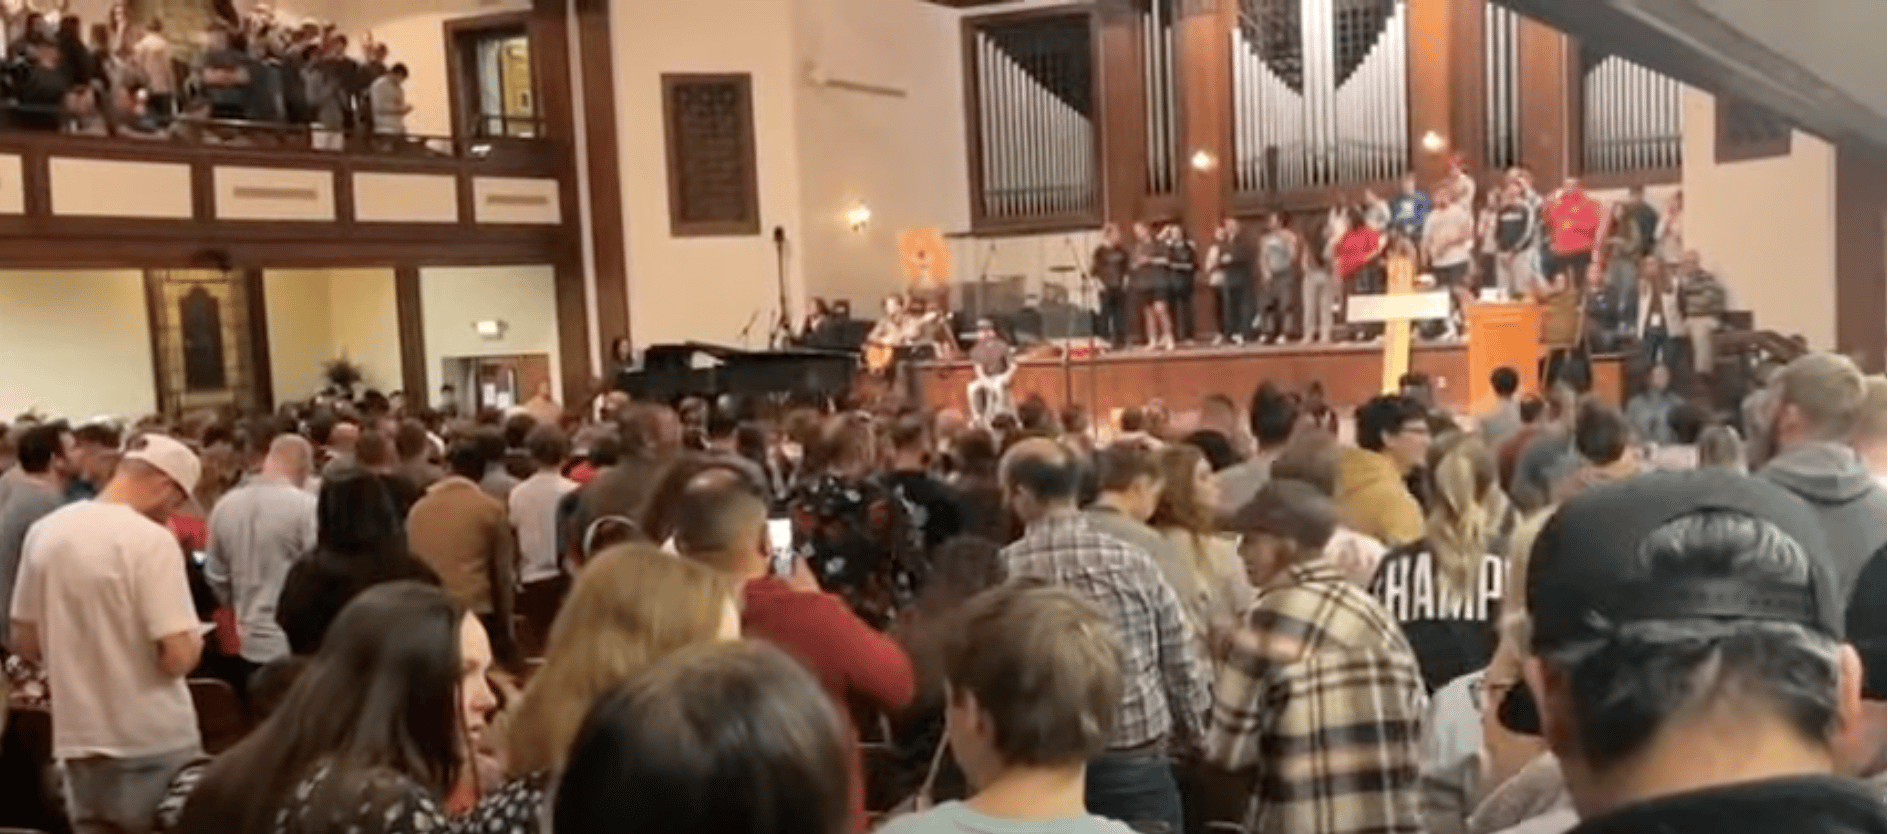 A nonstop Kentucky prayer ‘revival’ is exploding and people are traveling thousands of miles to take part